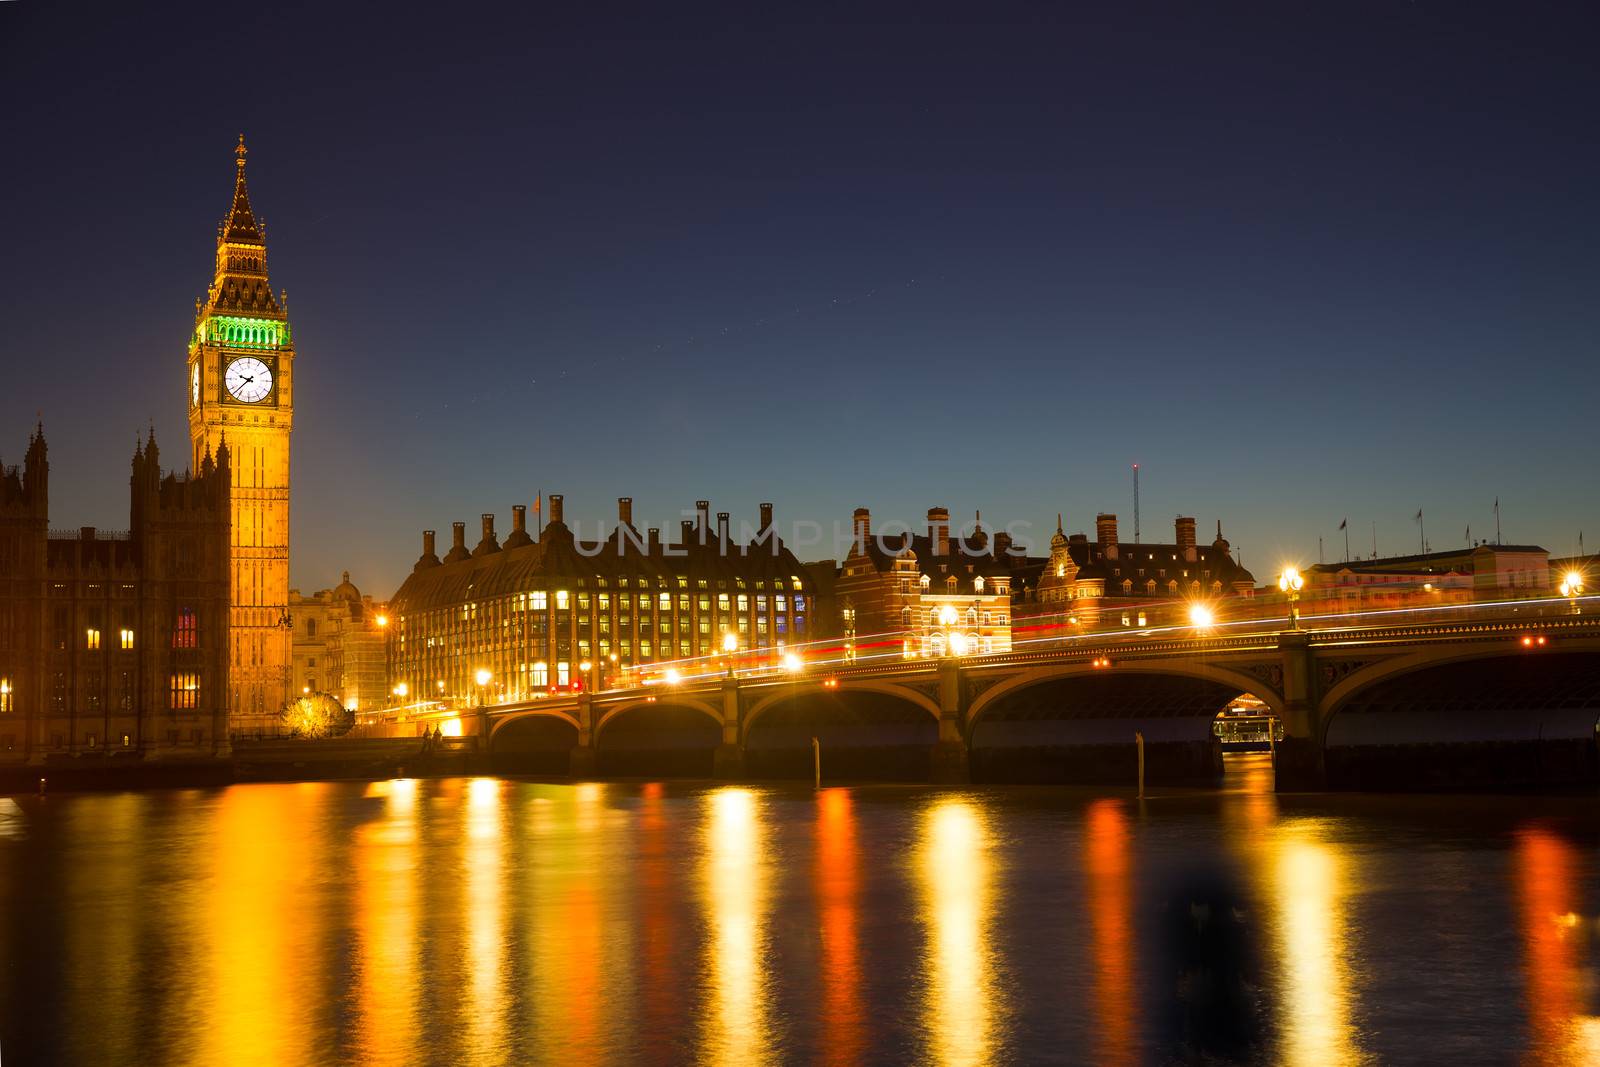 Westminster at night by darrenp